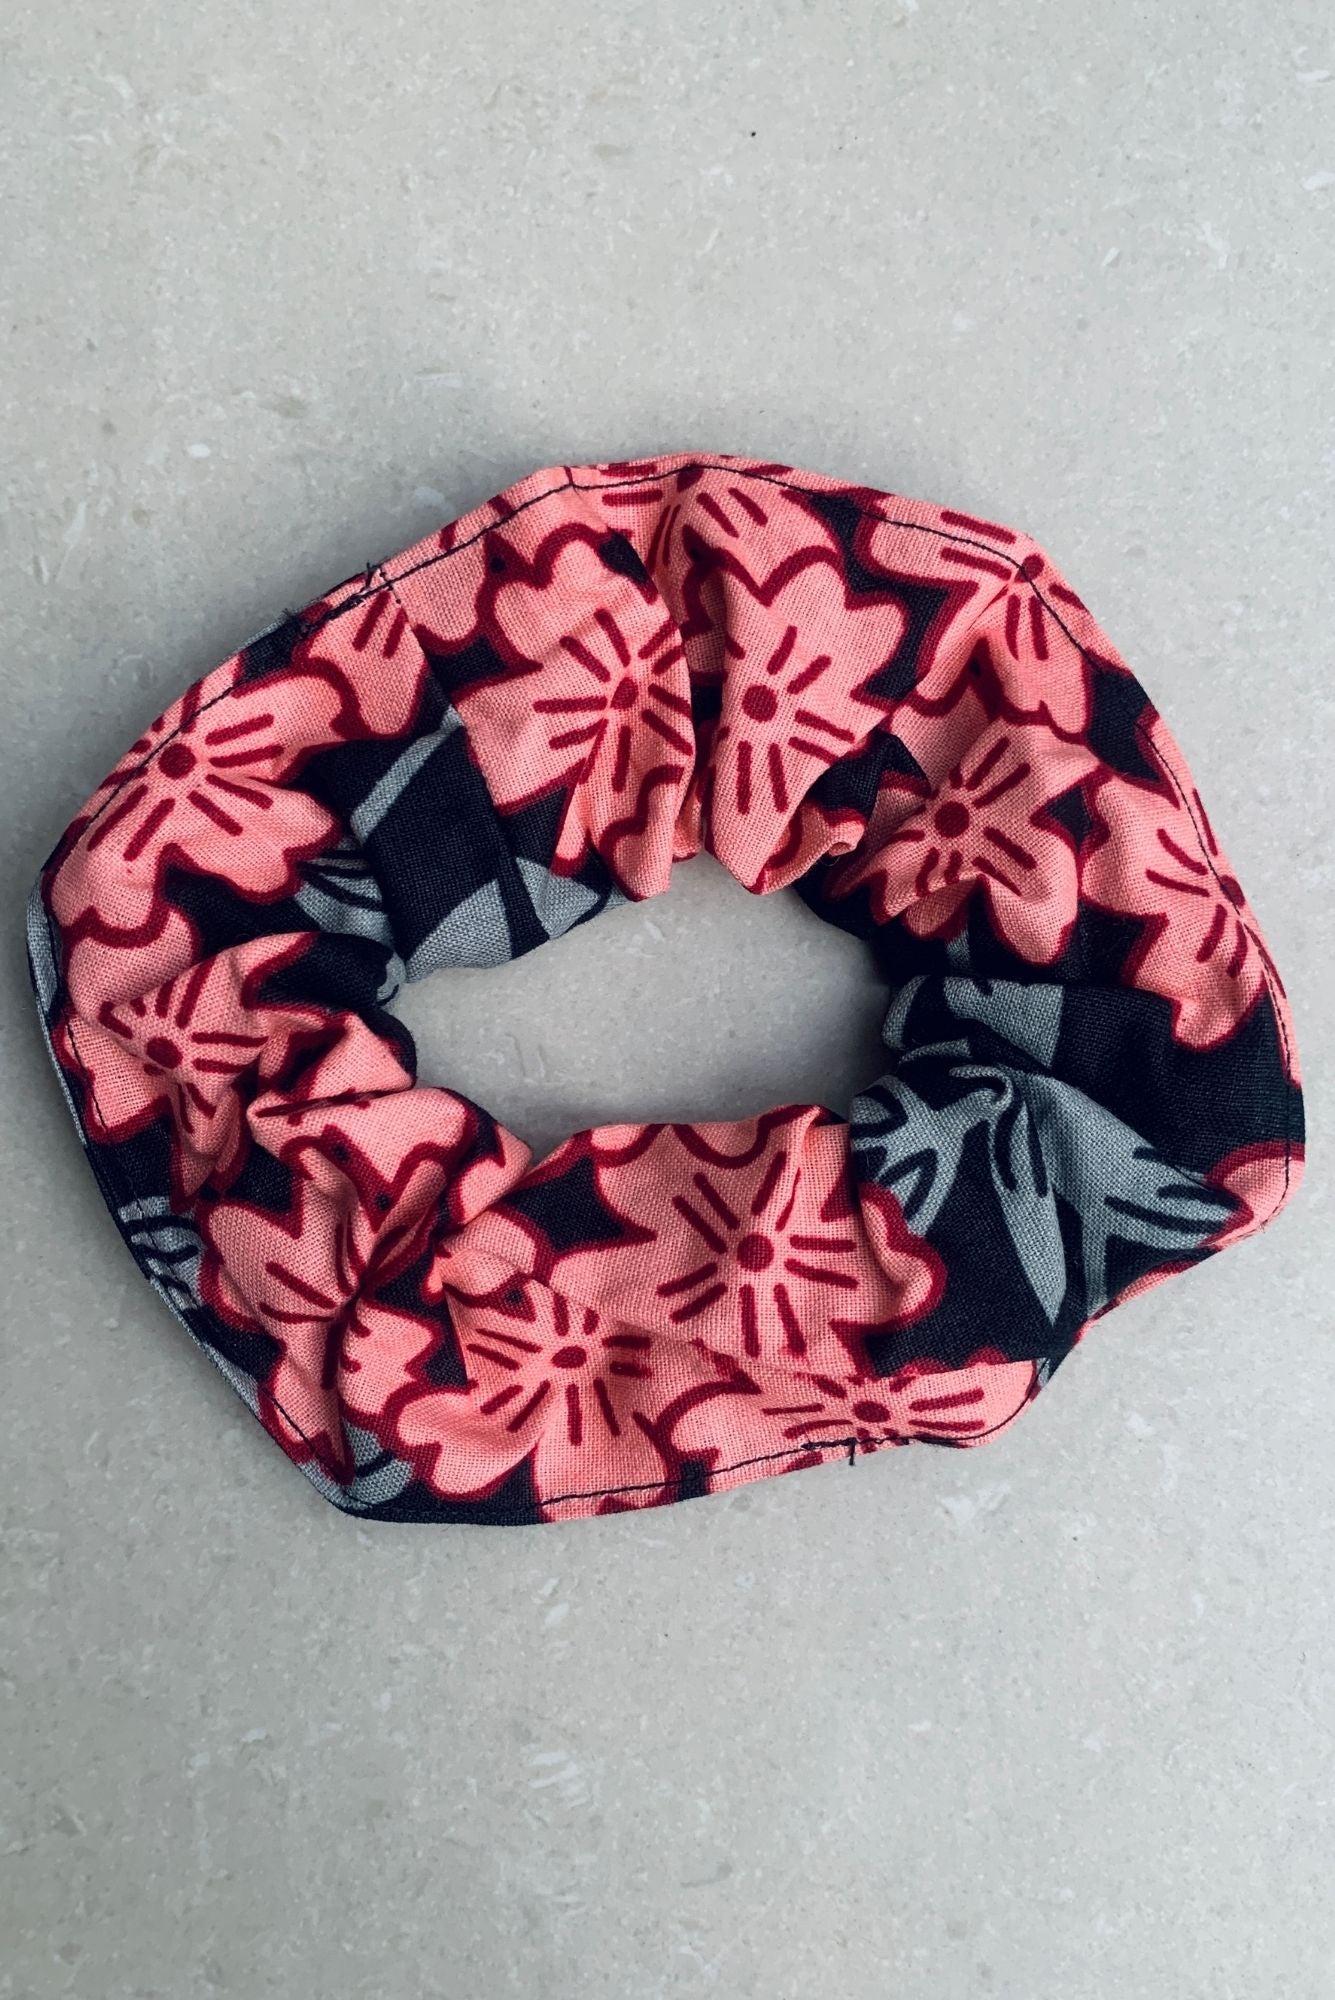 Scrunchie in Pink and Black Flowerbed